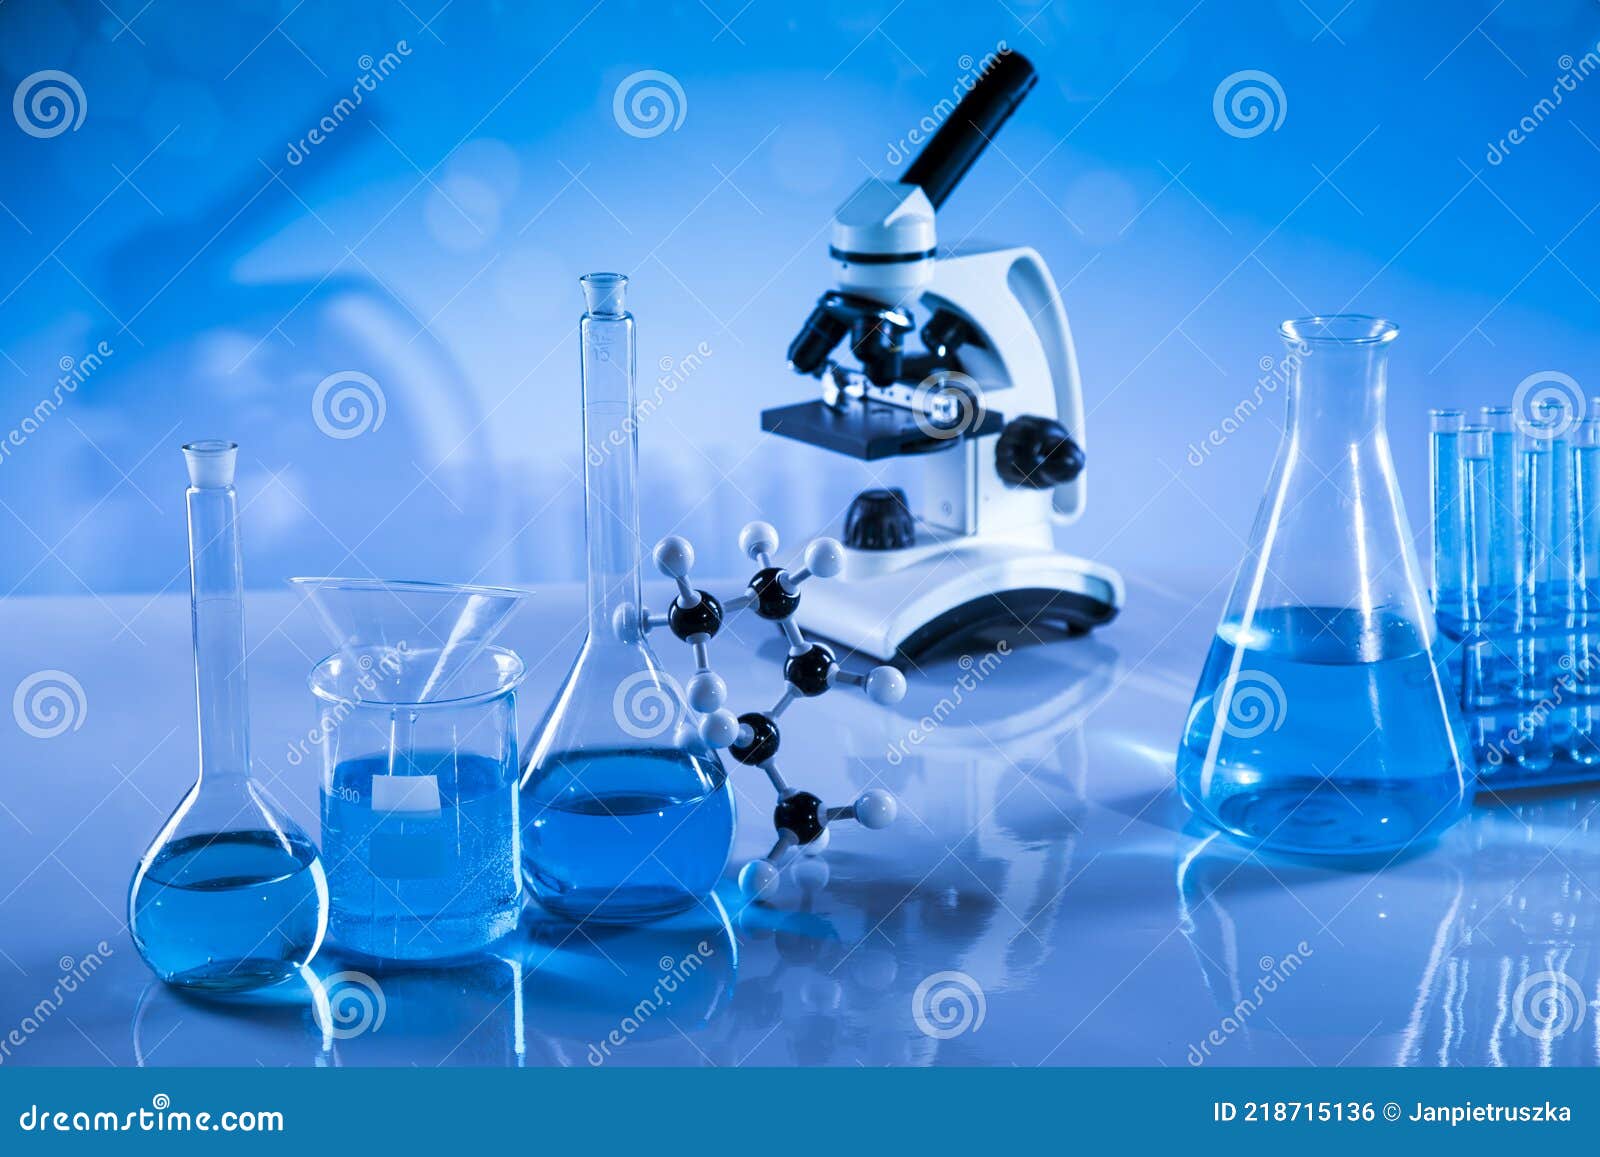 Laboratory Equipment, Glass Filled Background Stock Photo - Image of ...